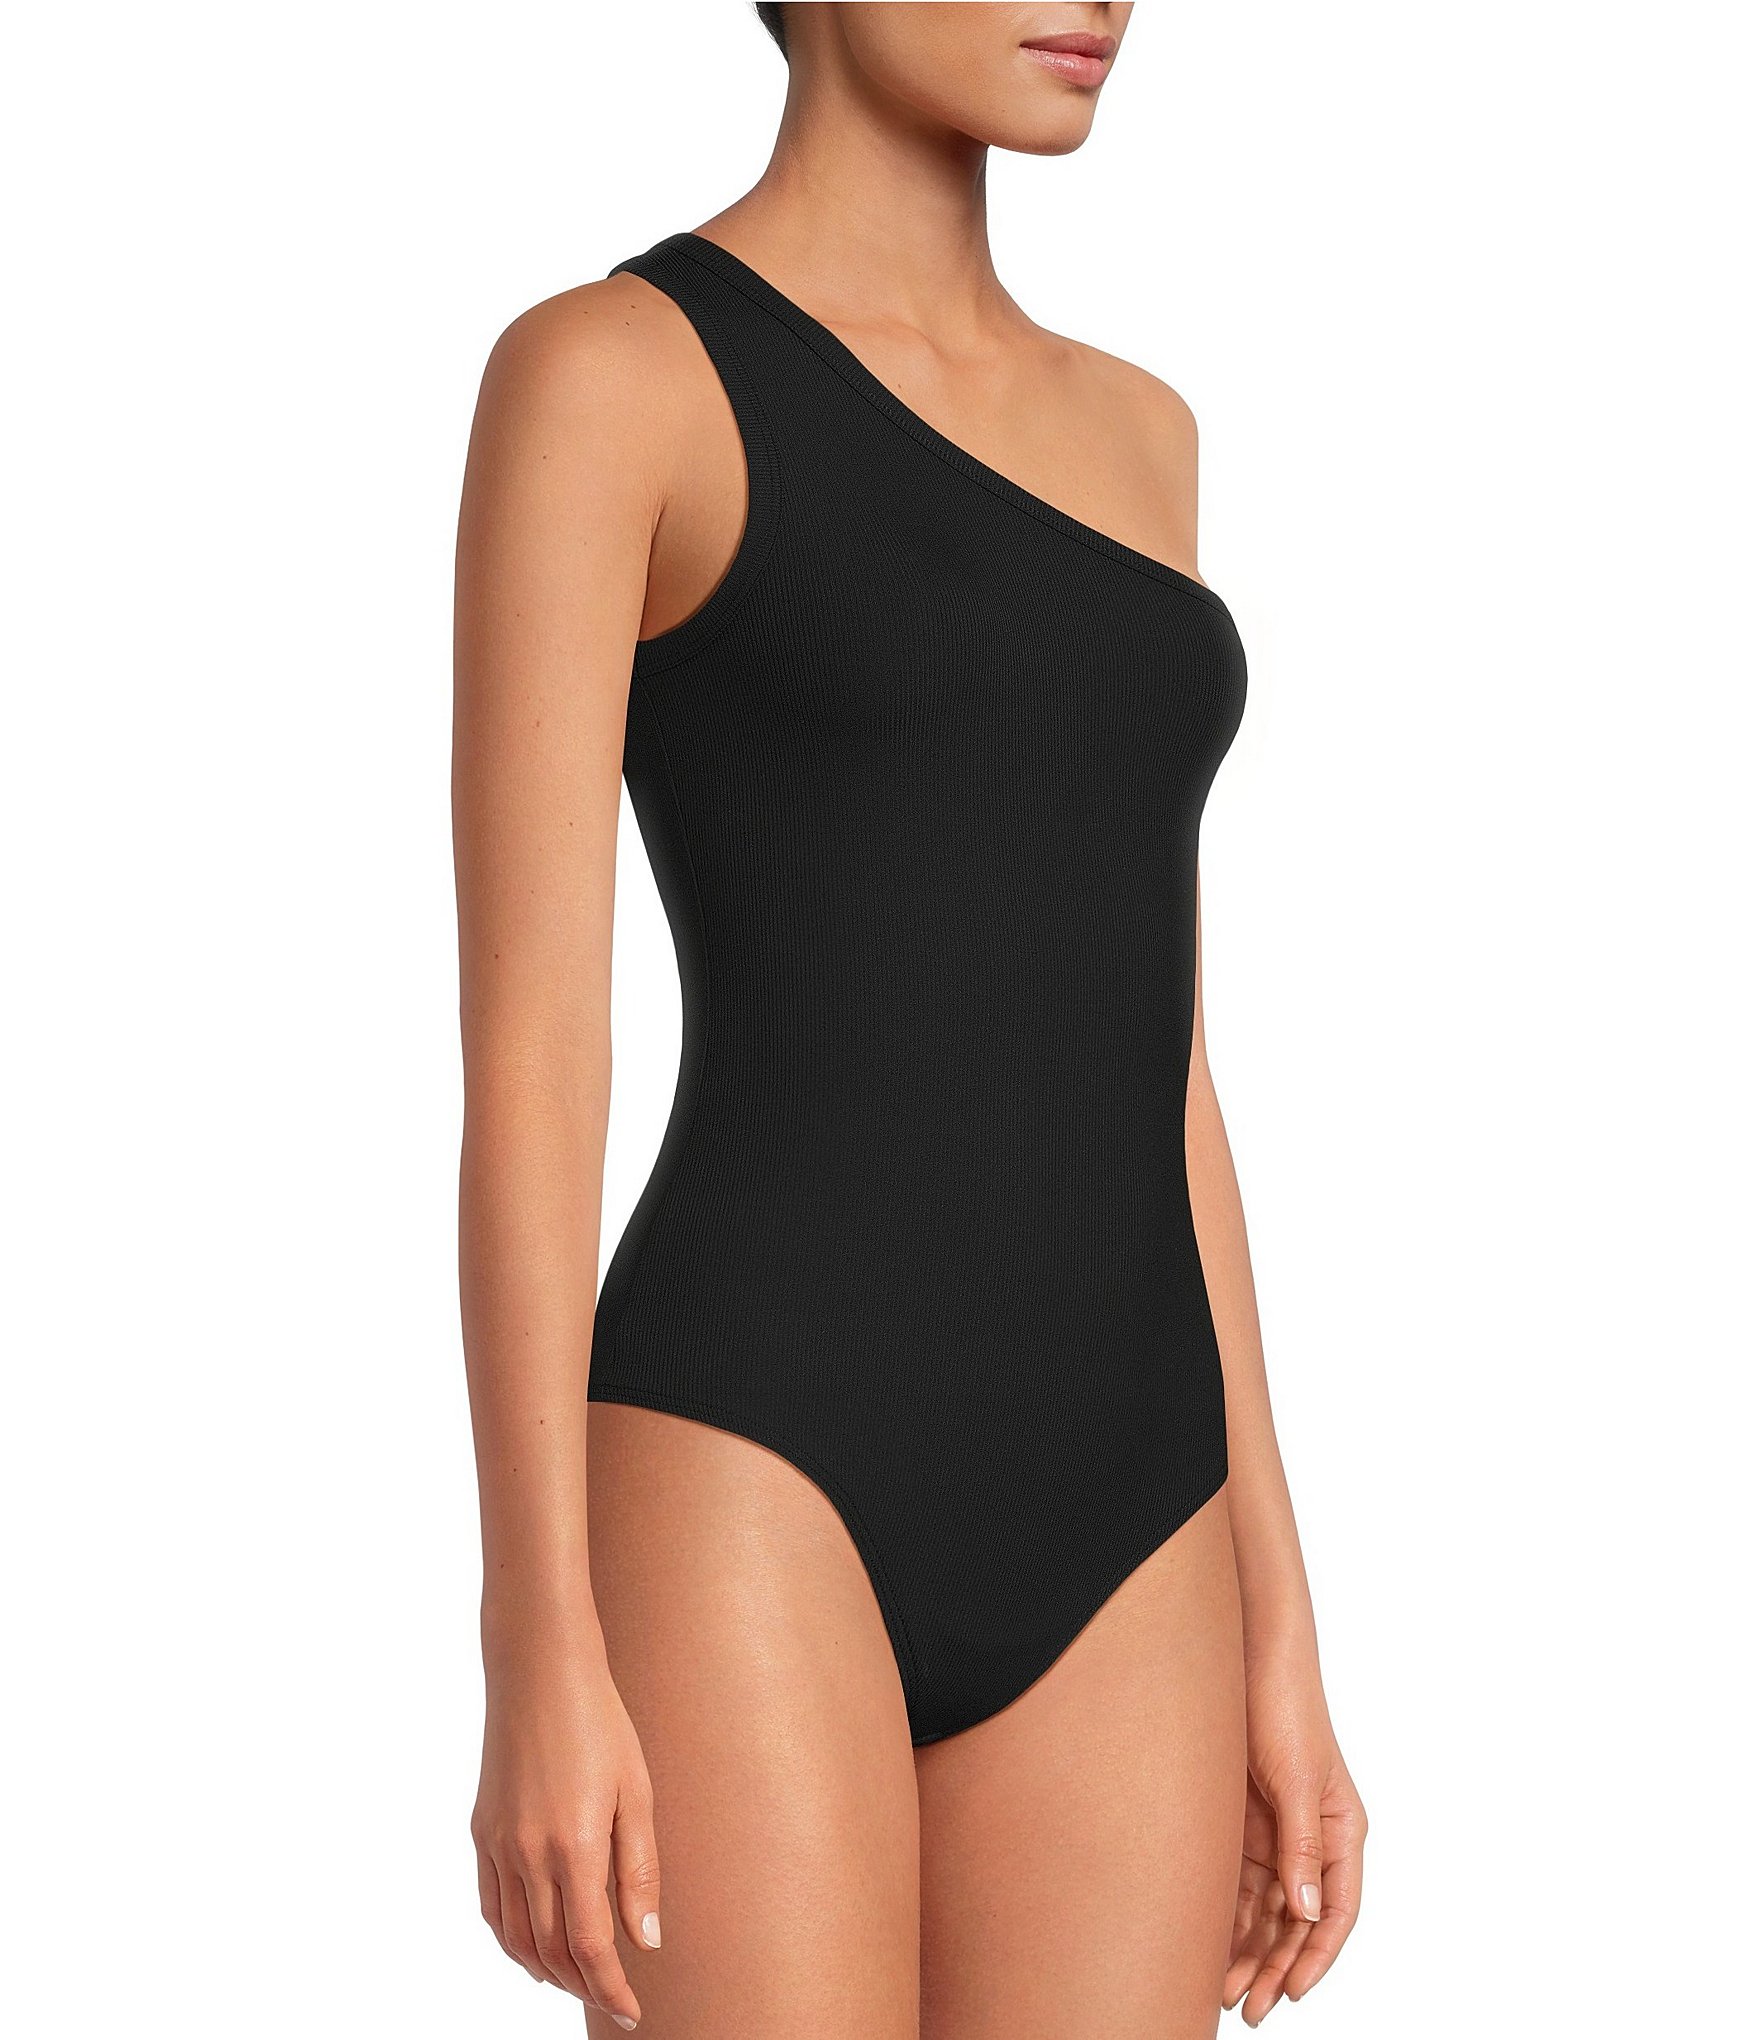 Ribbed Shapewear Bodysuit Is on Sale for Just $17